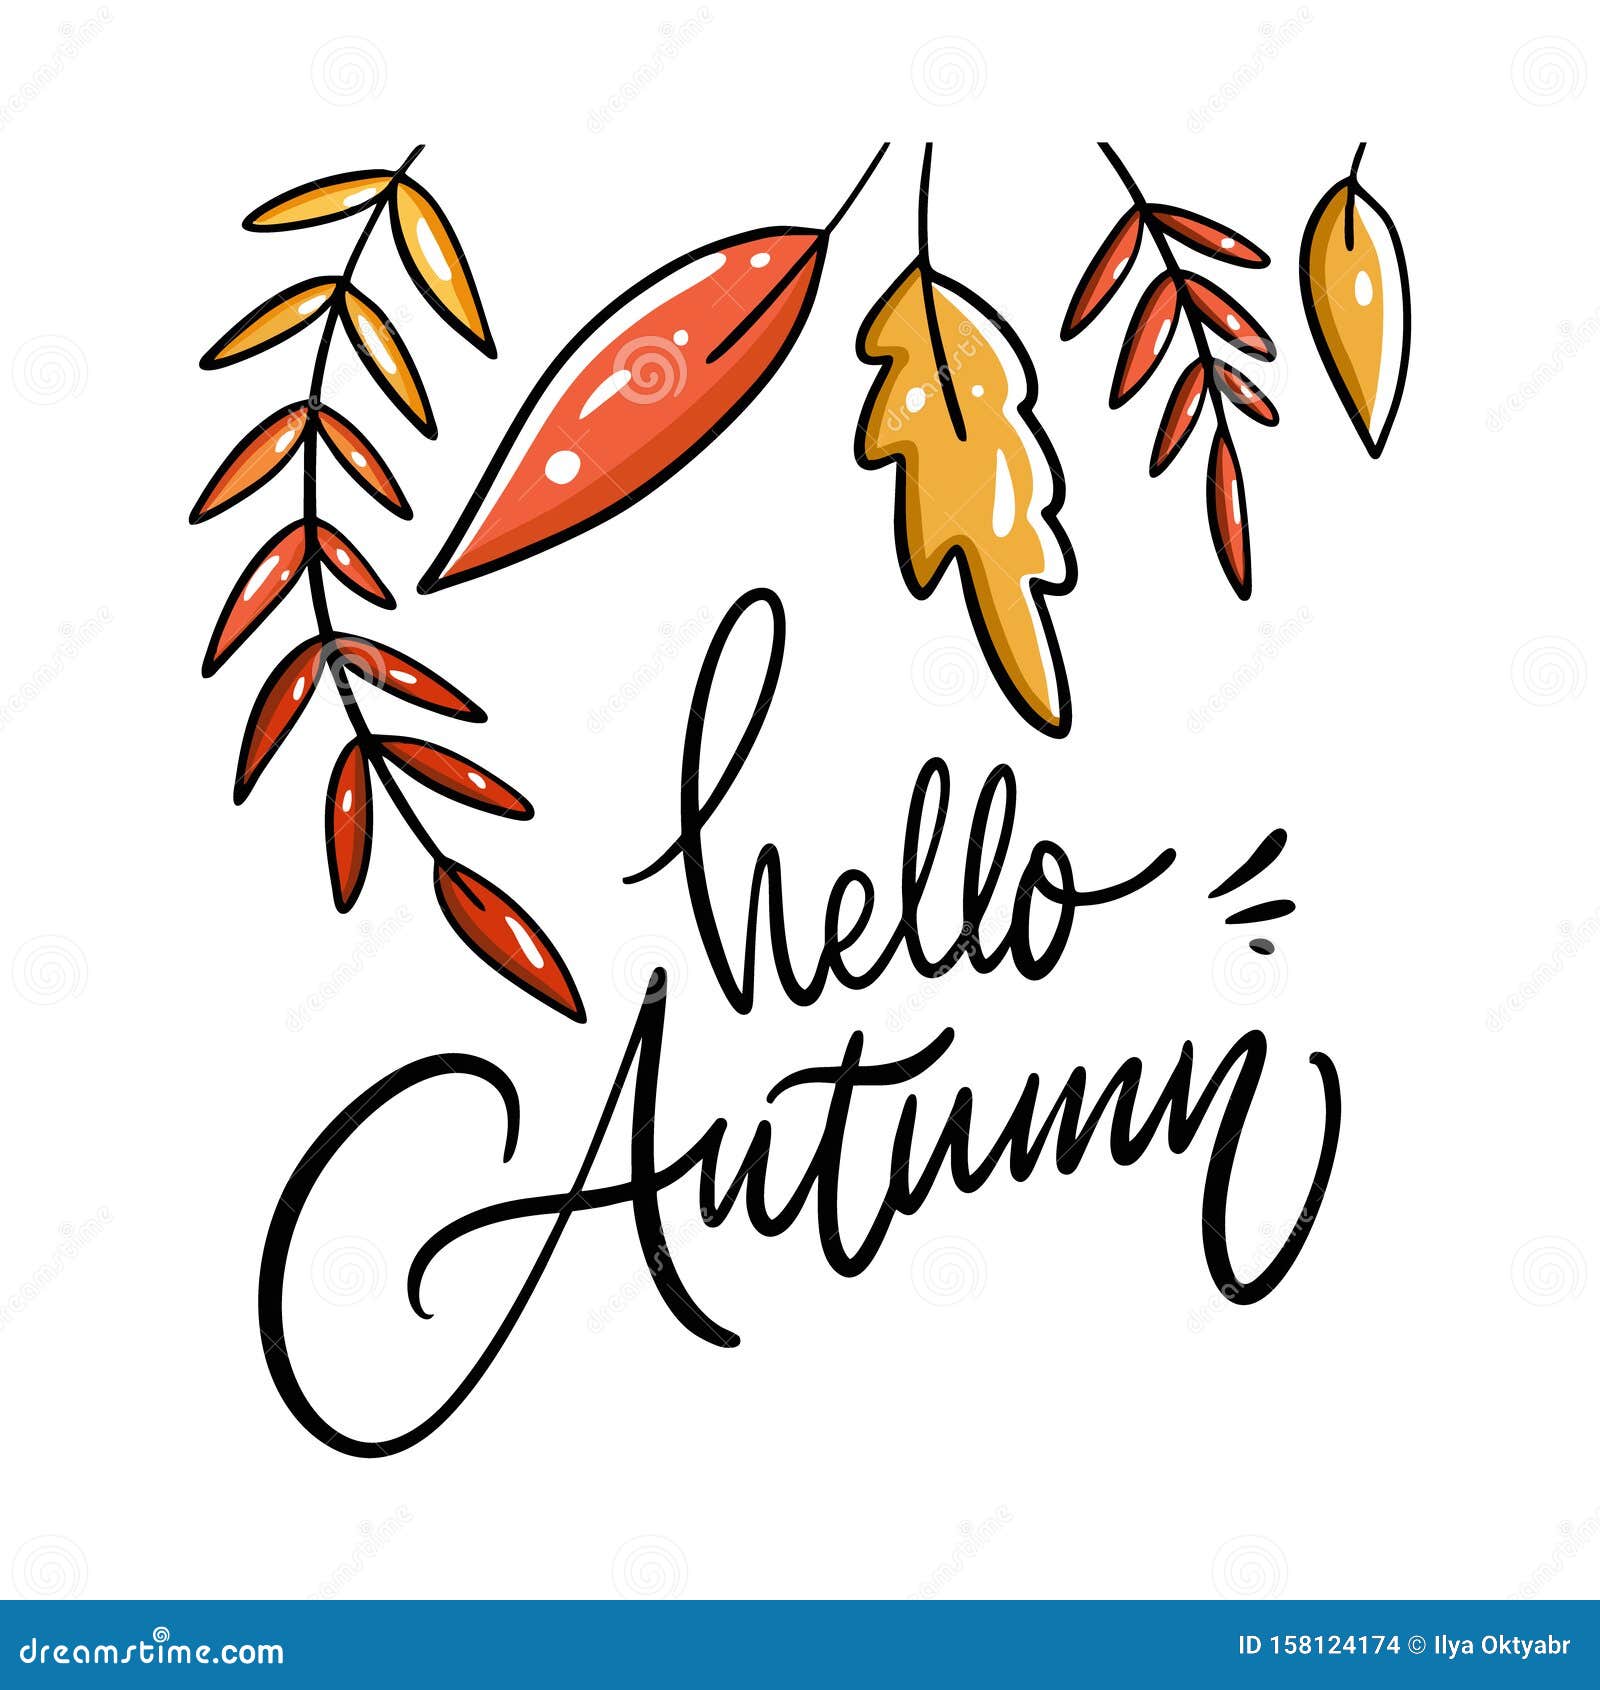 Hello Autumn Leaves Hand Drawn Vector Illustration. Isolated on White ...